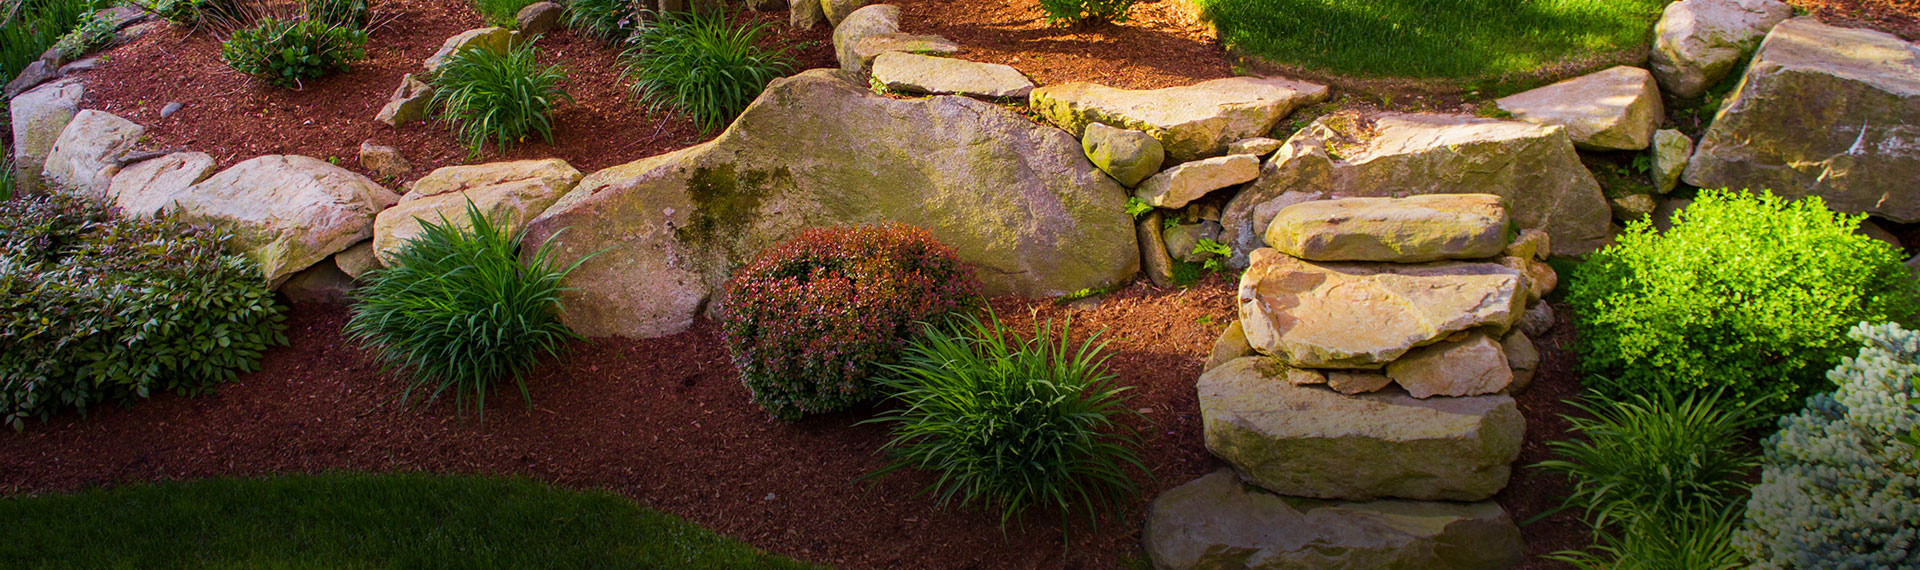 Landscaped flower bed with red mulch